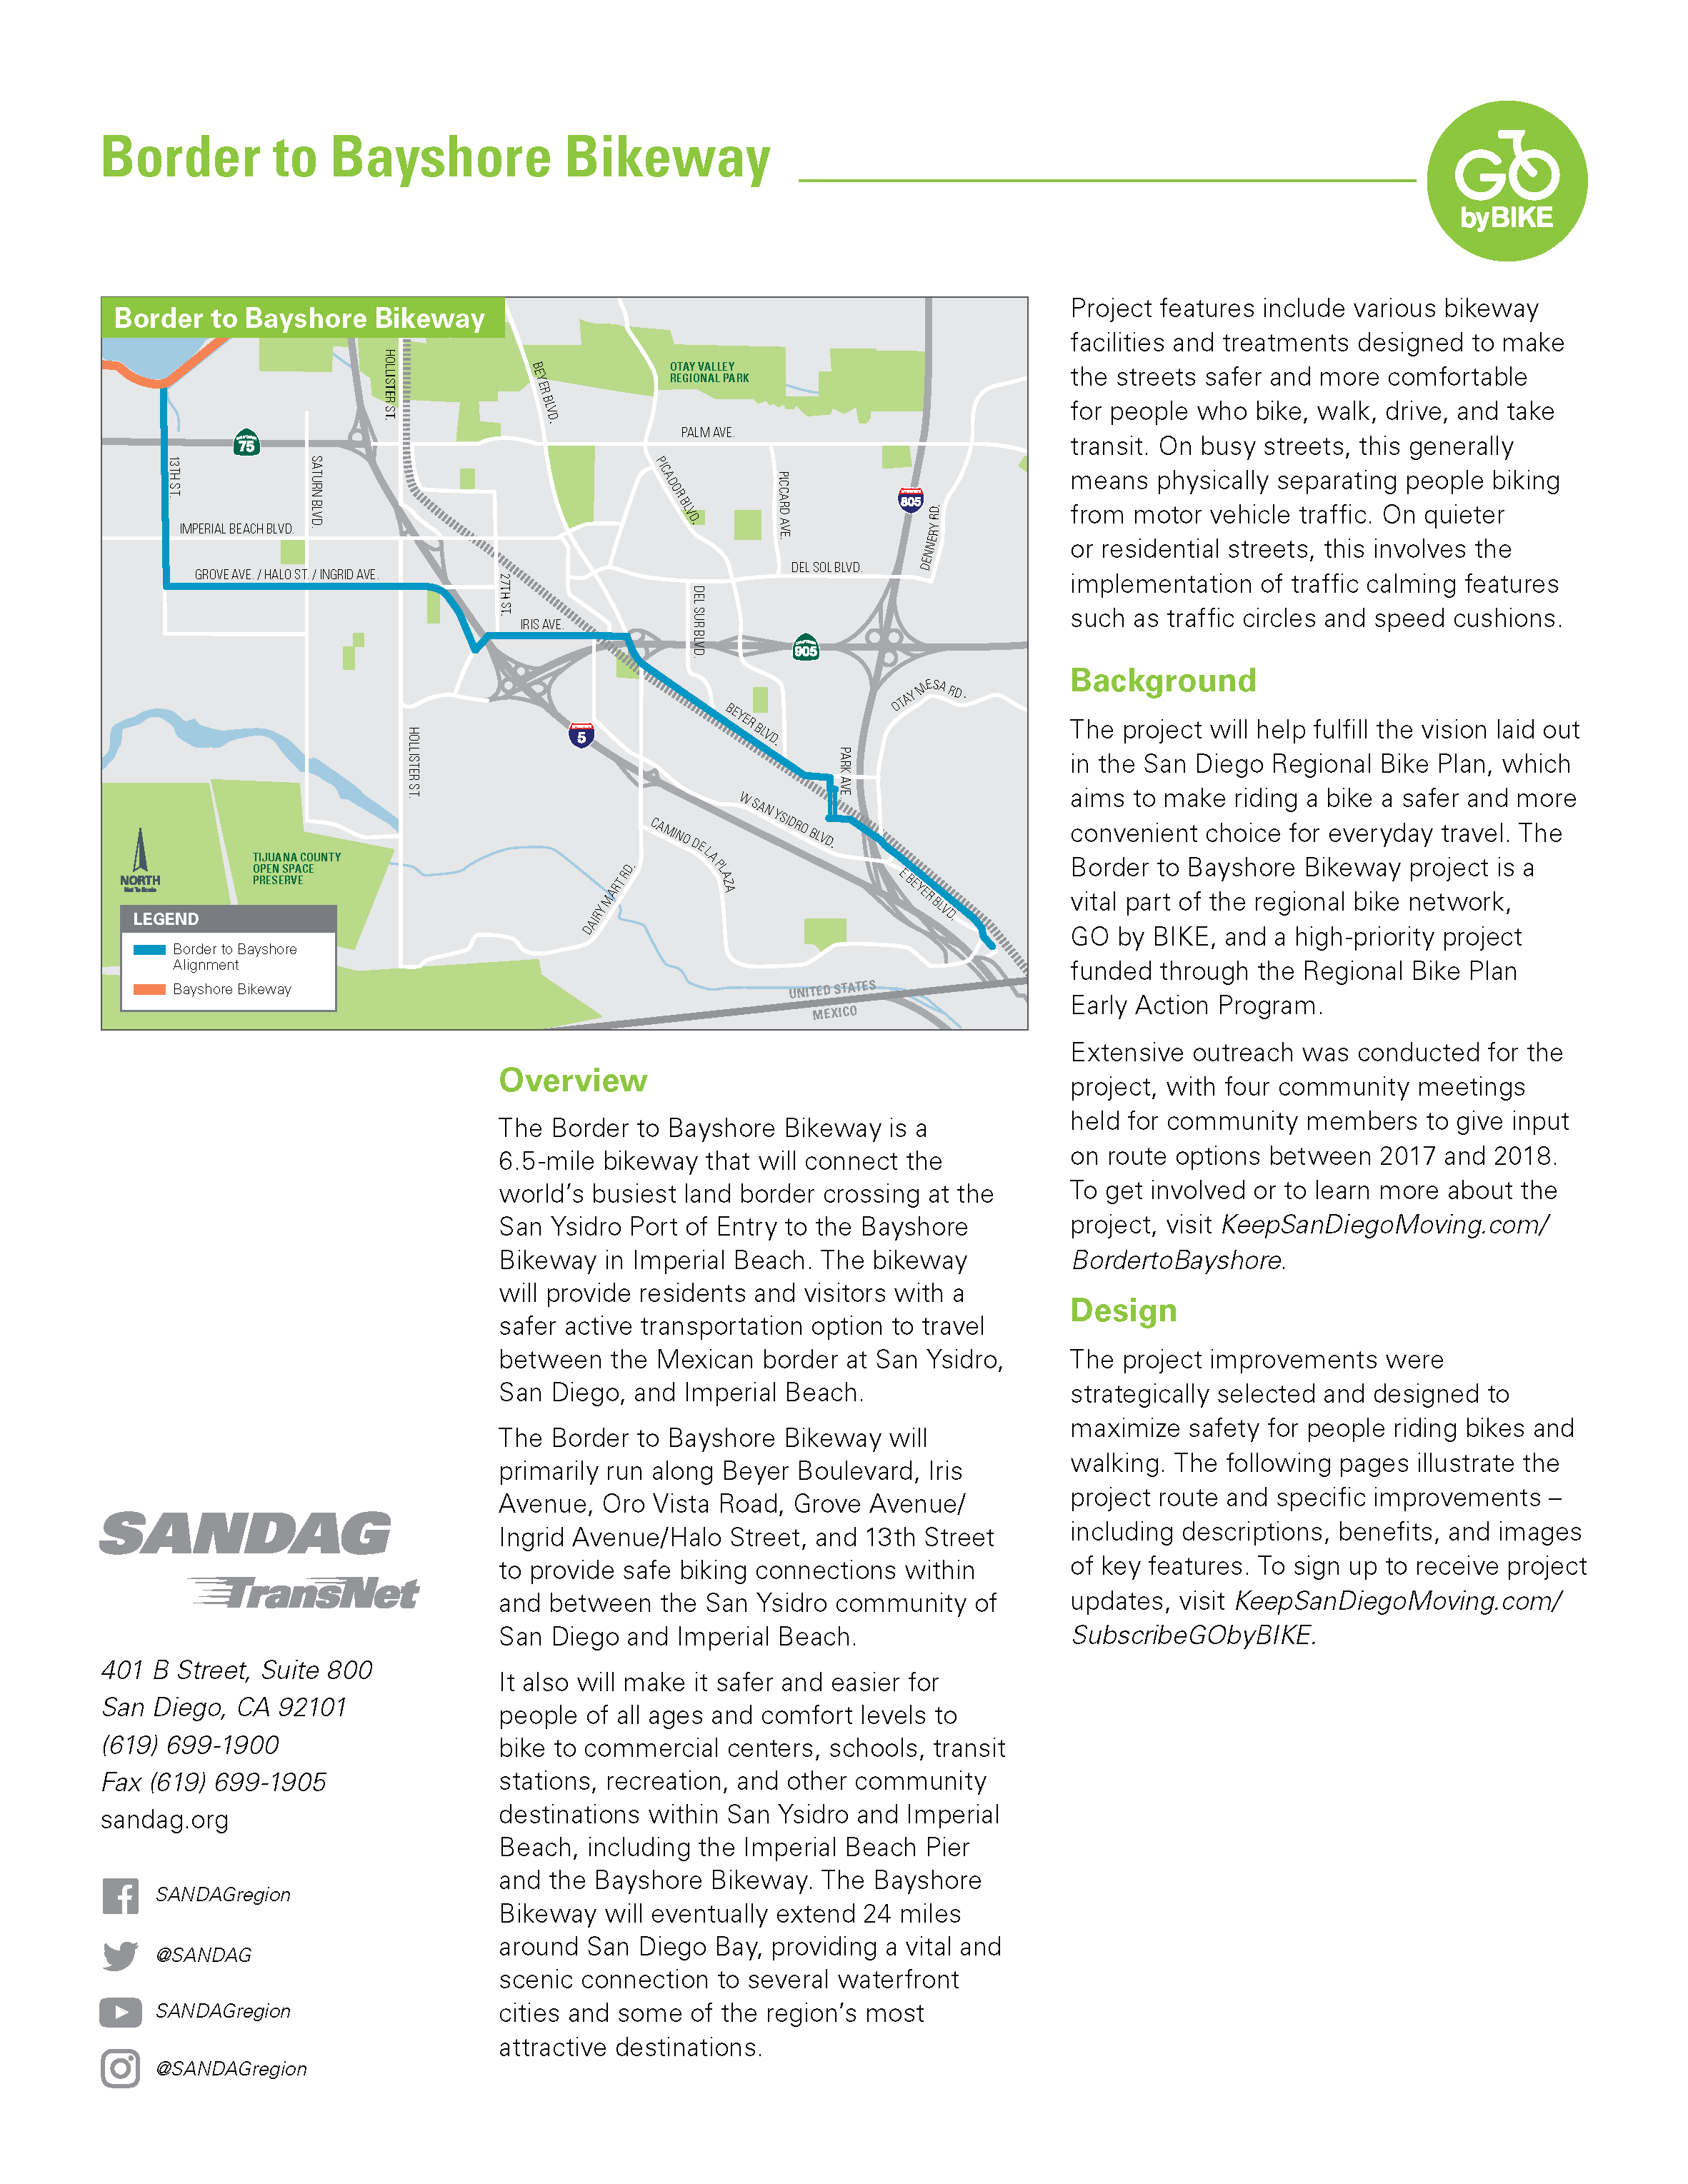 View the Border to Bayshore Bikeway project fact sheet in English.